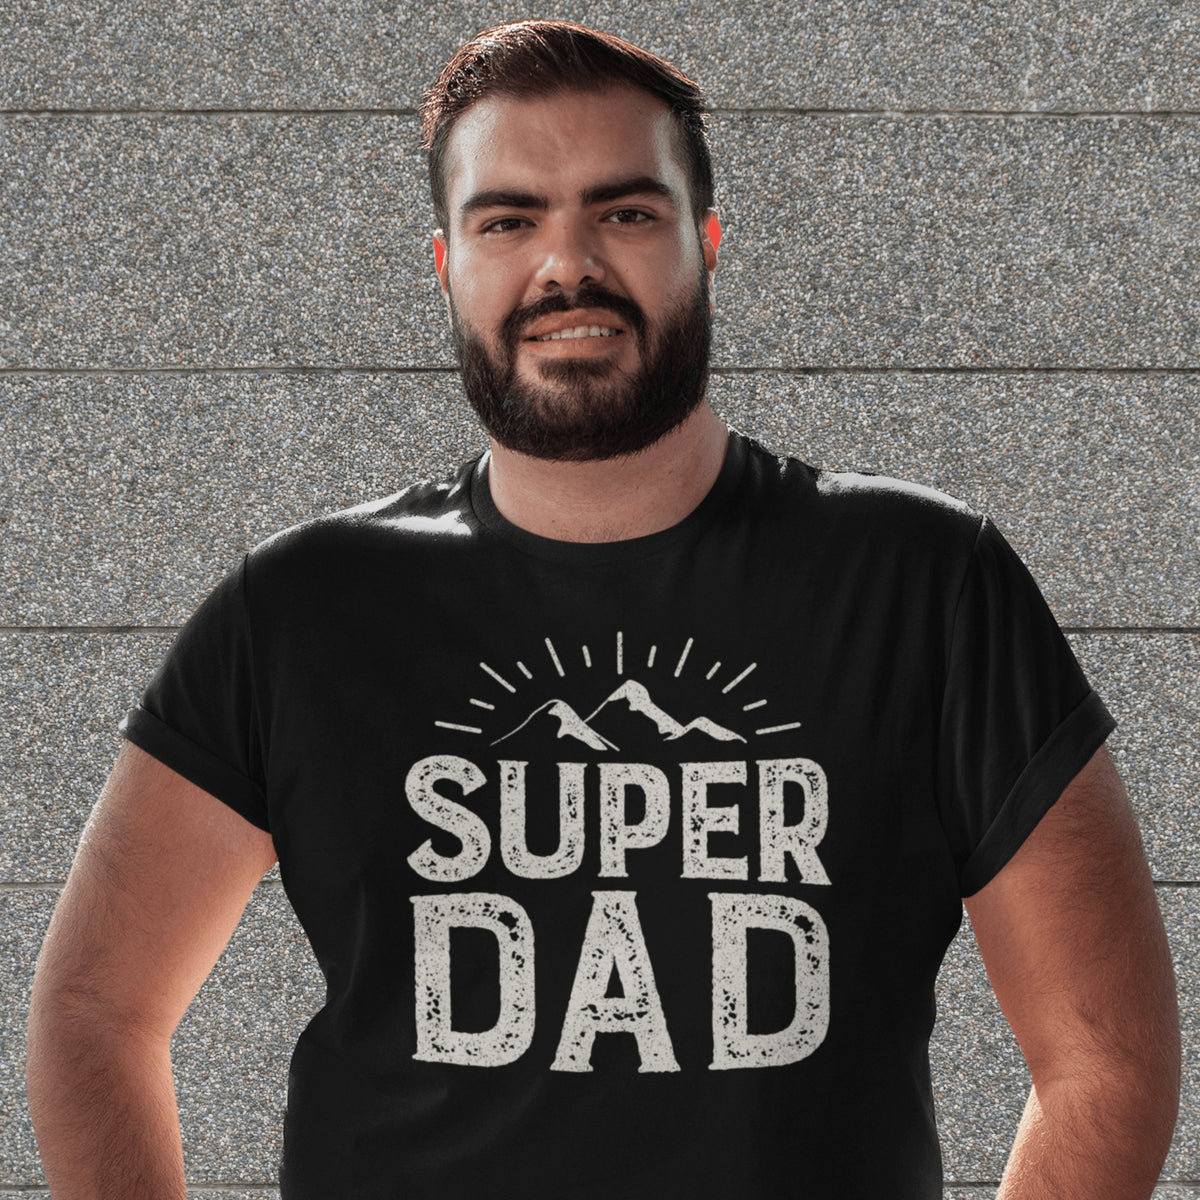 Super Dad Short-Sleeve T-Shirt For Fathers Day Dads Gift - Eventwisecreations